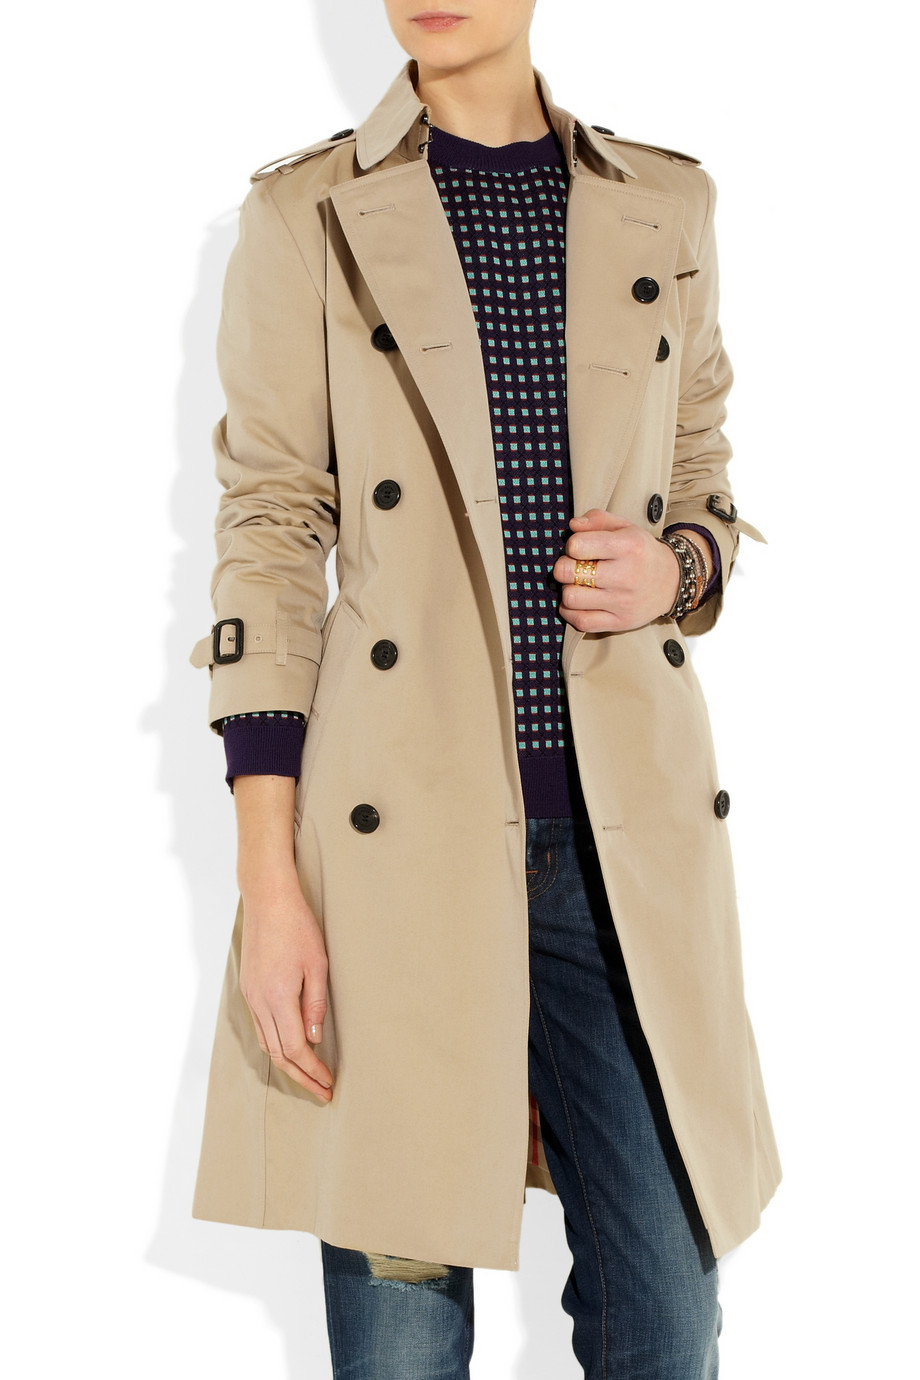 Lyst - Burberry Cotton-Twill Trench Coat in Brown